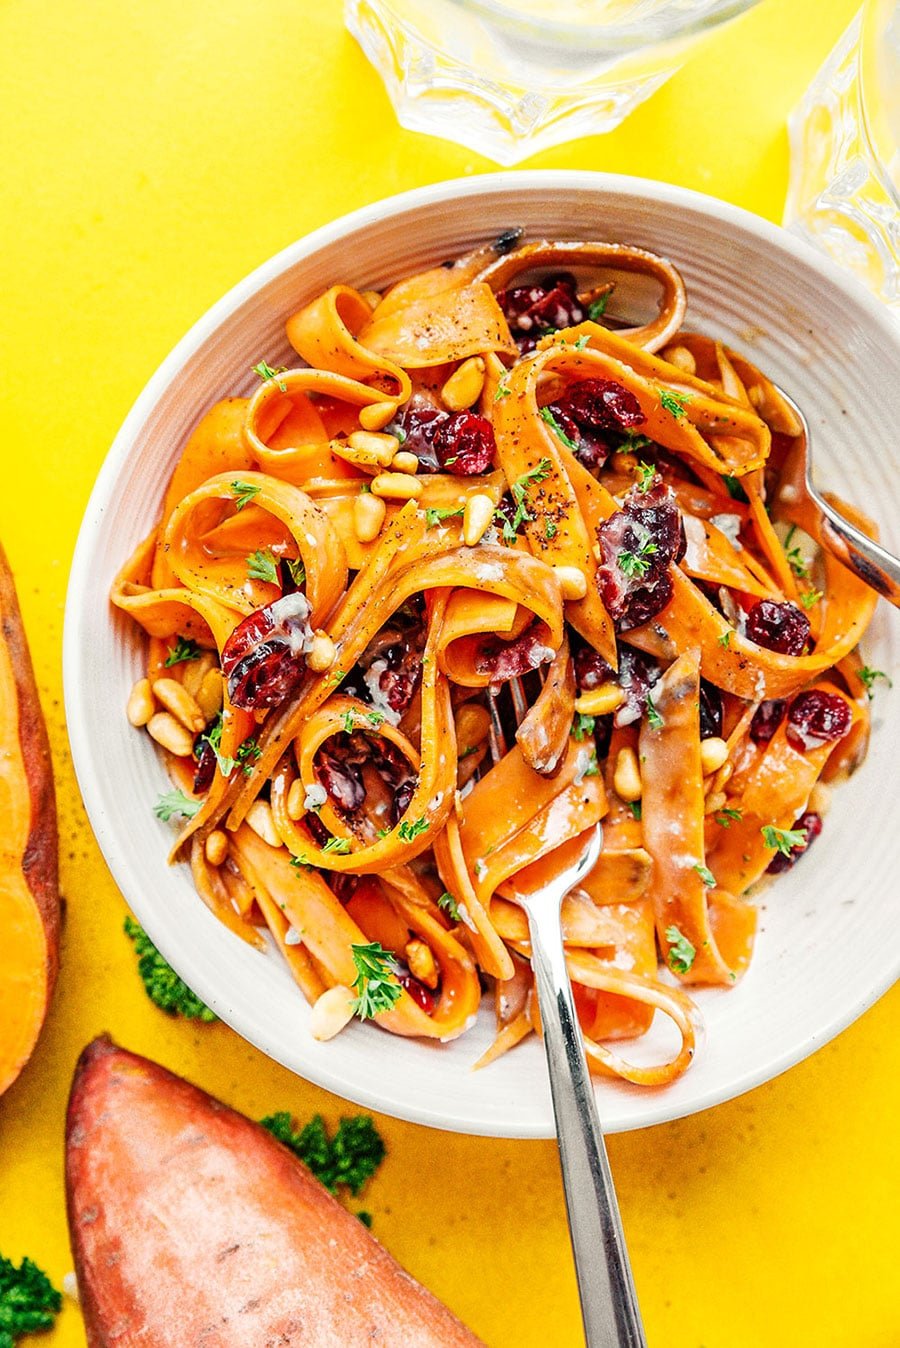 Sweet potato fettuccine noodles in a bowl on a yellow background